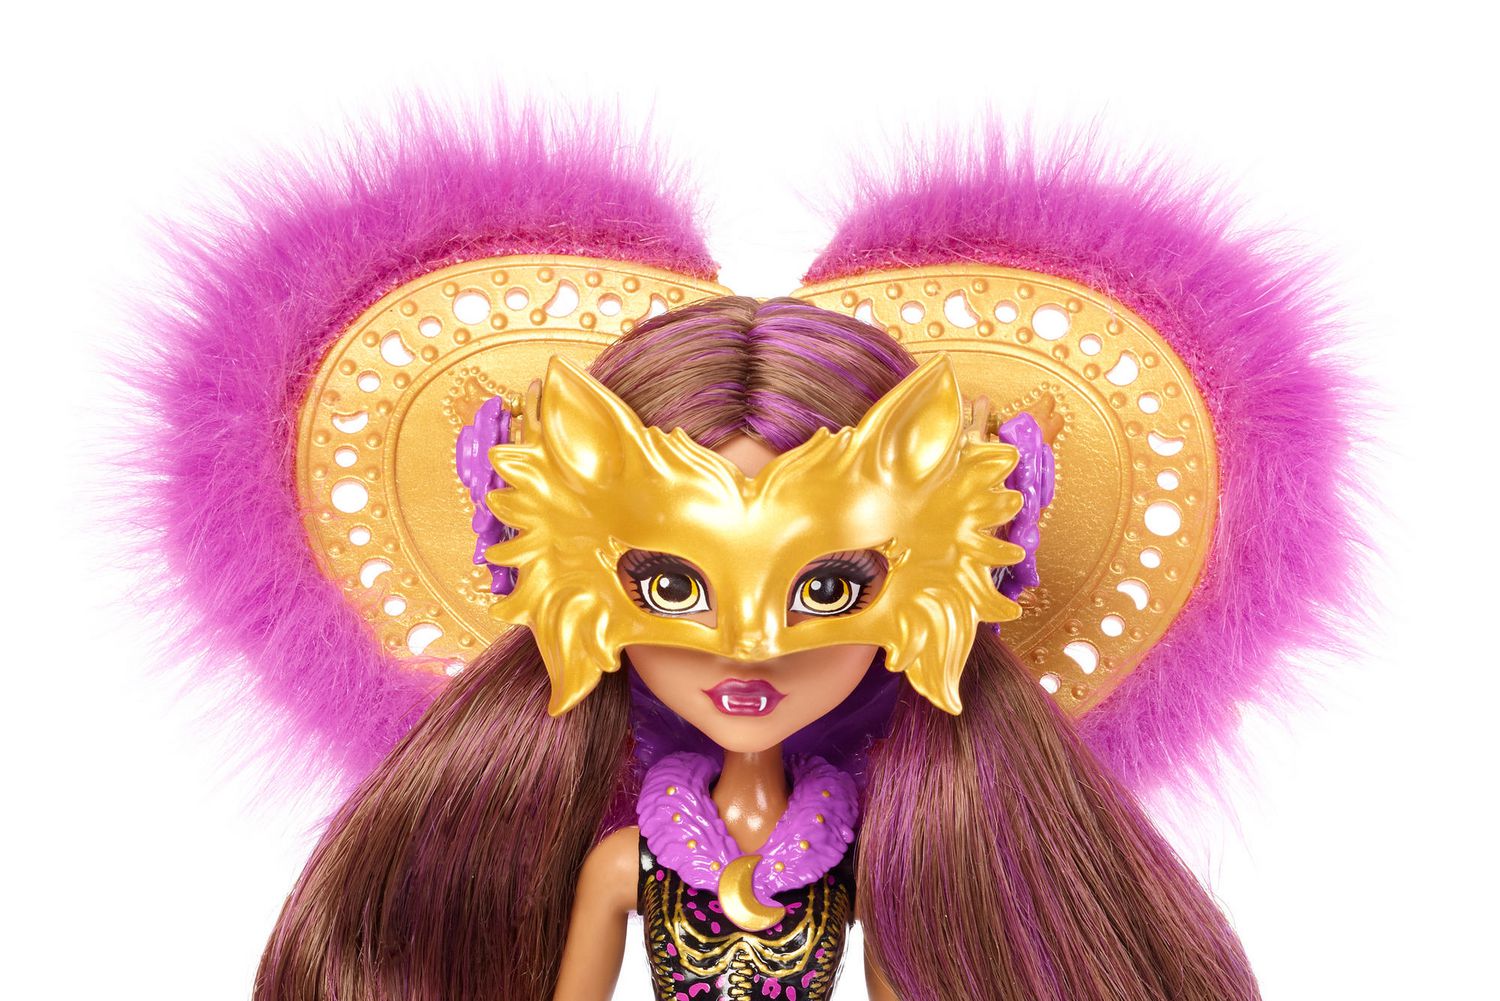 Monster High Ghoul to Wolf Clawdeen Wolf Transformation Doll